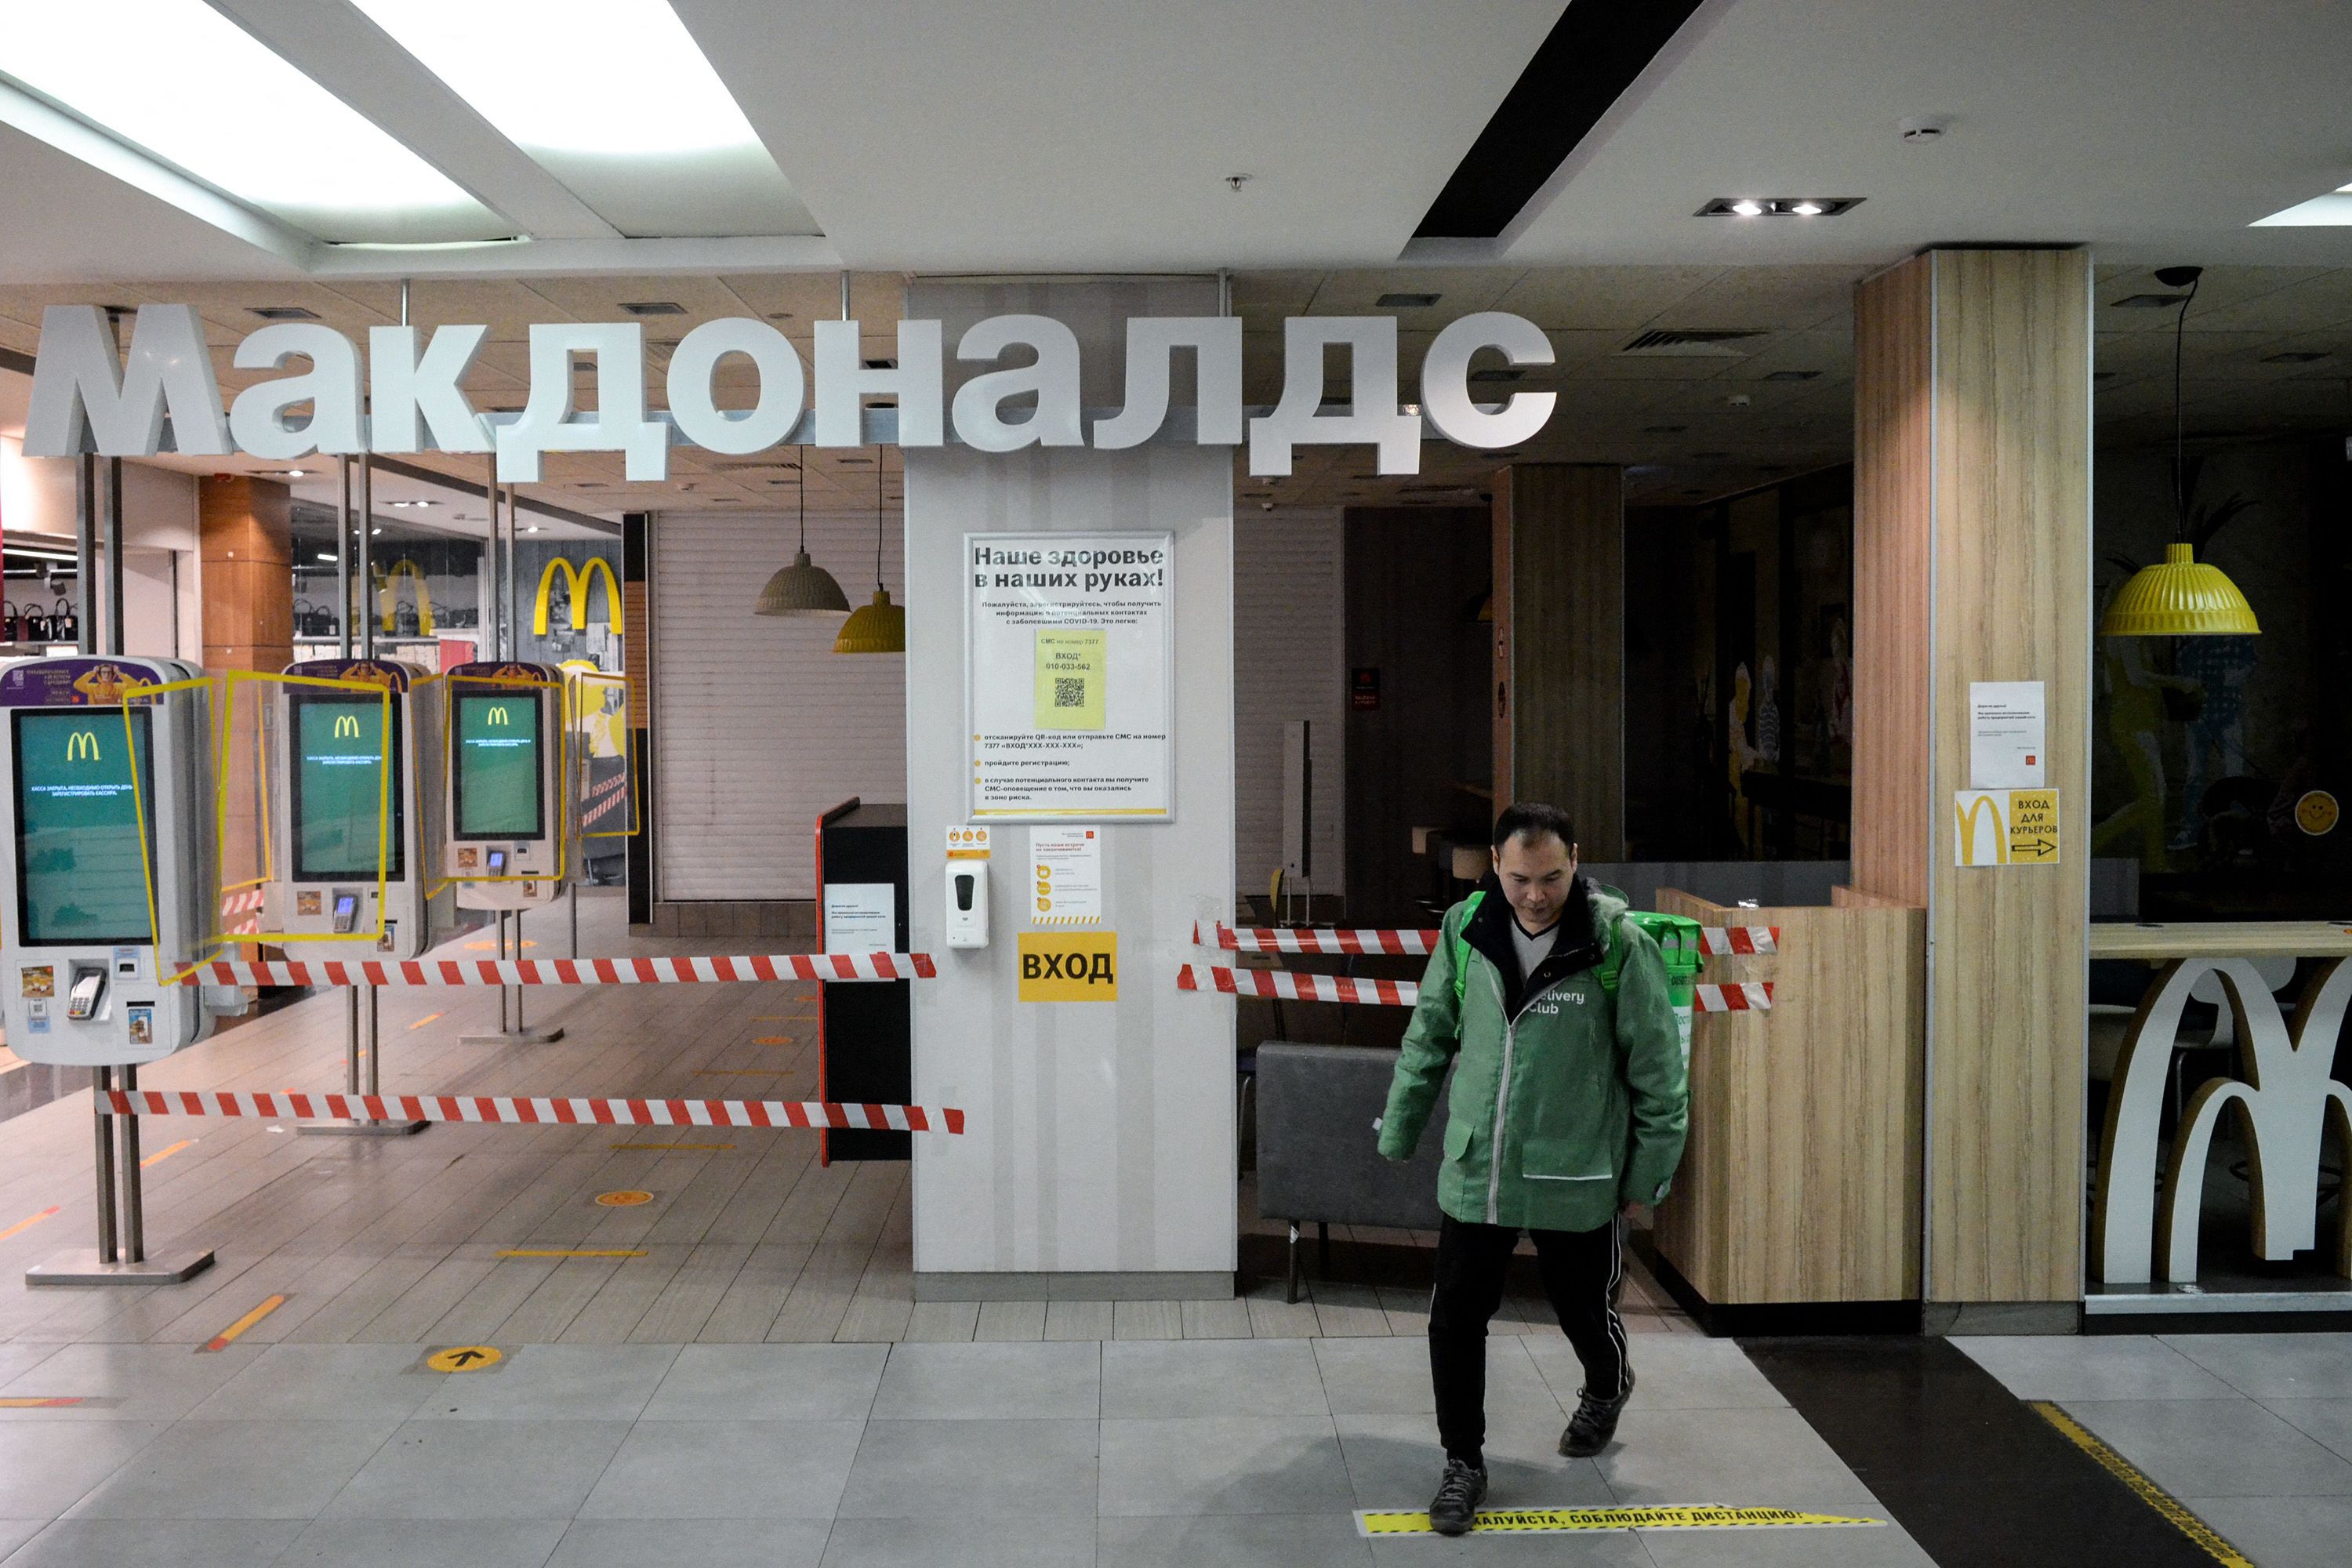 A view of a closed McDonald's restaurant in a shopping center in Moscow on March 16, 2022.